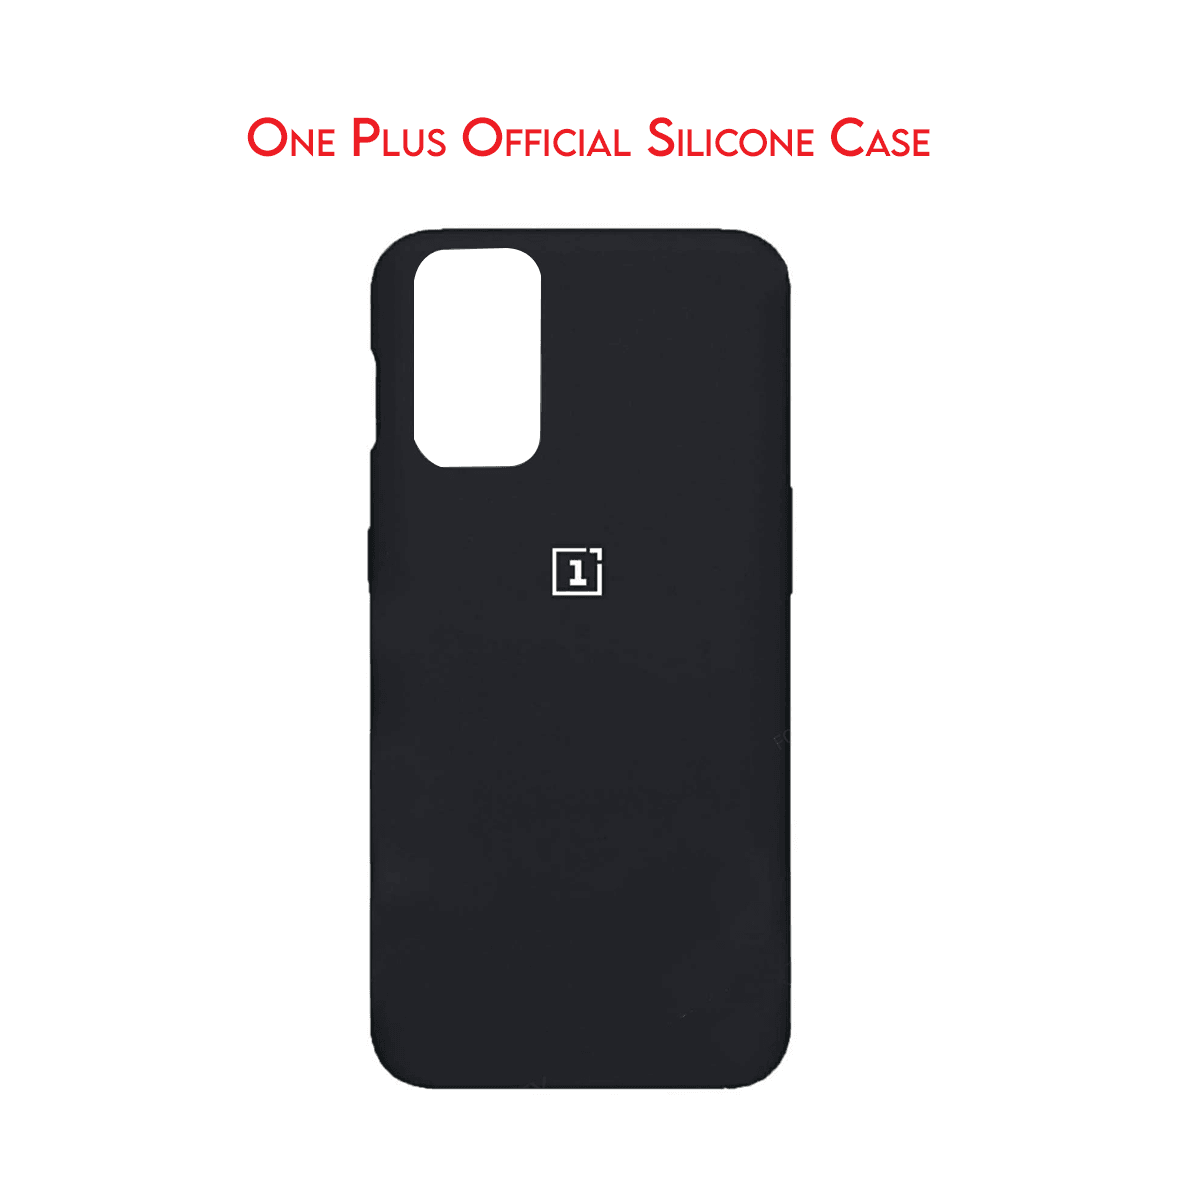 One Plus Silicon Cover All Models - Basra Mobile Center